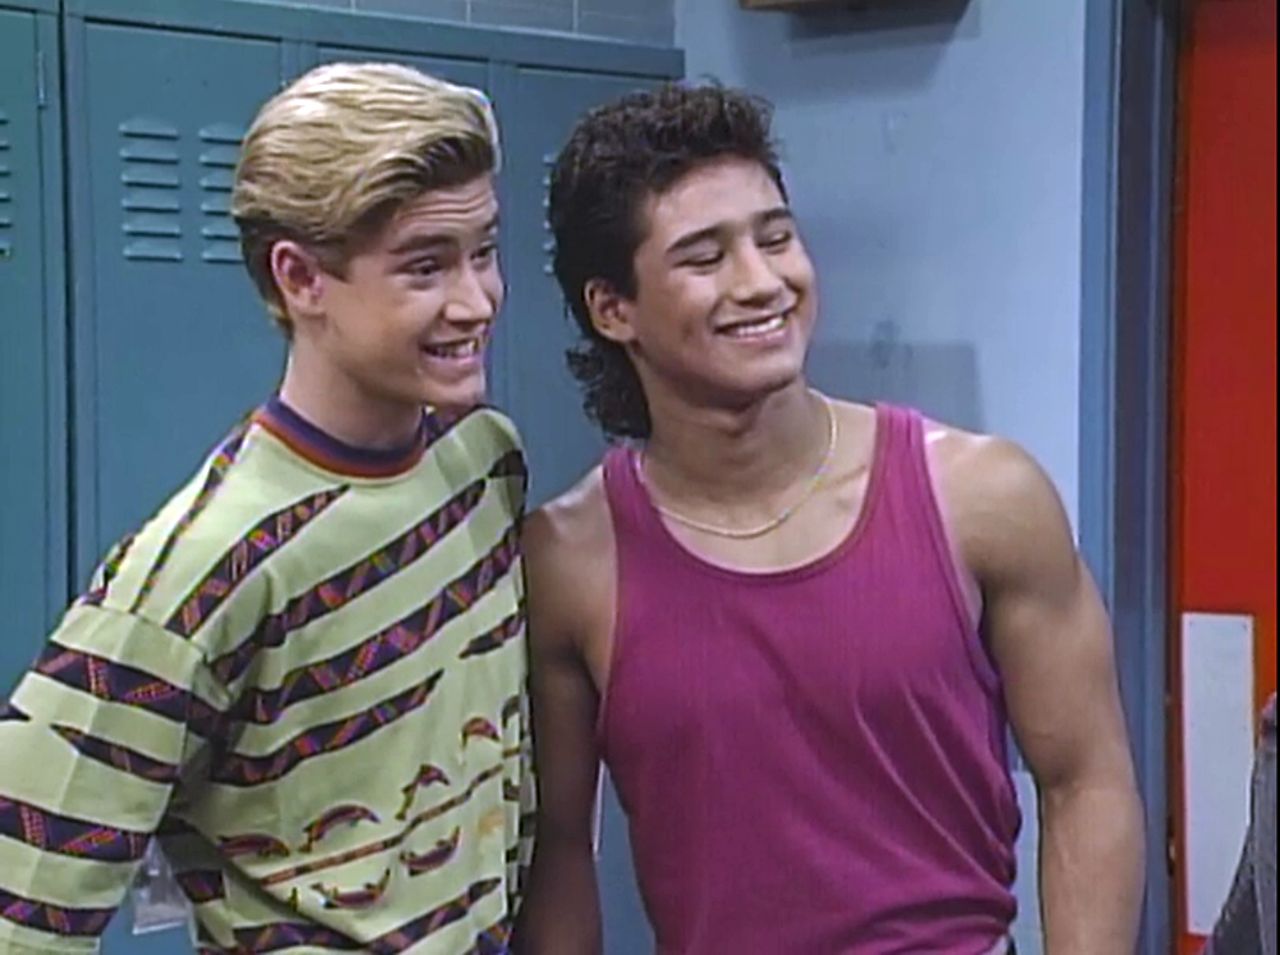 Mark-Paul Gosselaar and Mario Lopez had everyone wishing they could enroll at the fictional Bayside High thanks to their roles on "Saved by the Bell." Gosselaar exuded charm and wit as Zack Morris, while Lopez's physique -- and those dimples! -- made TV viewers fall for A.C. Slater. 